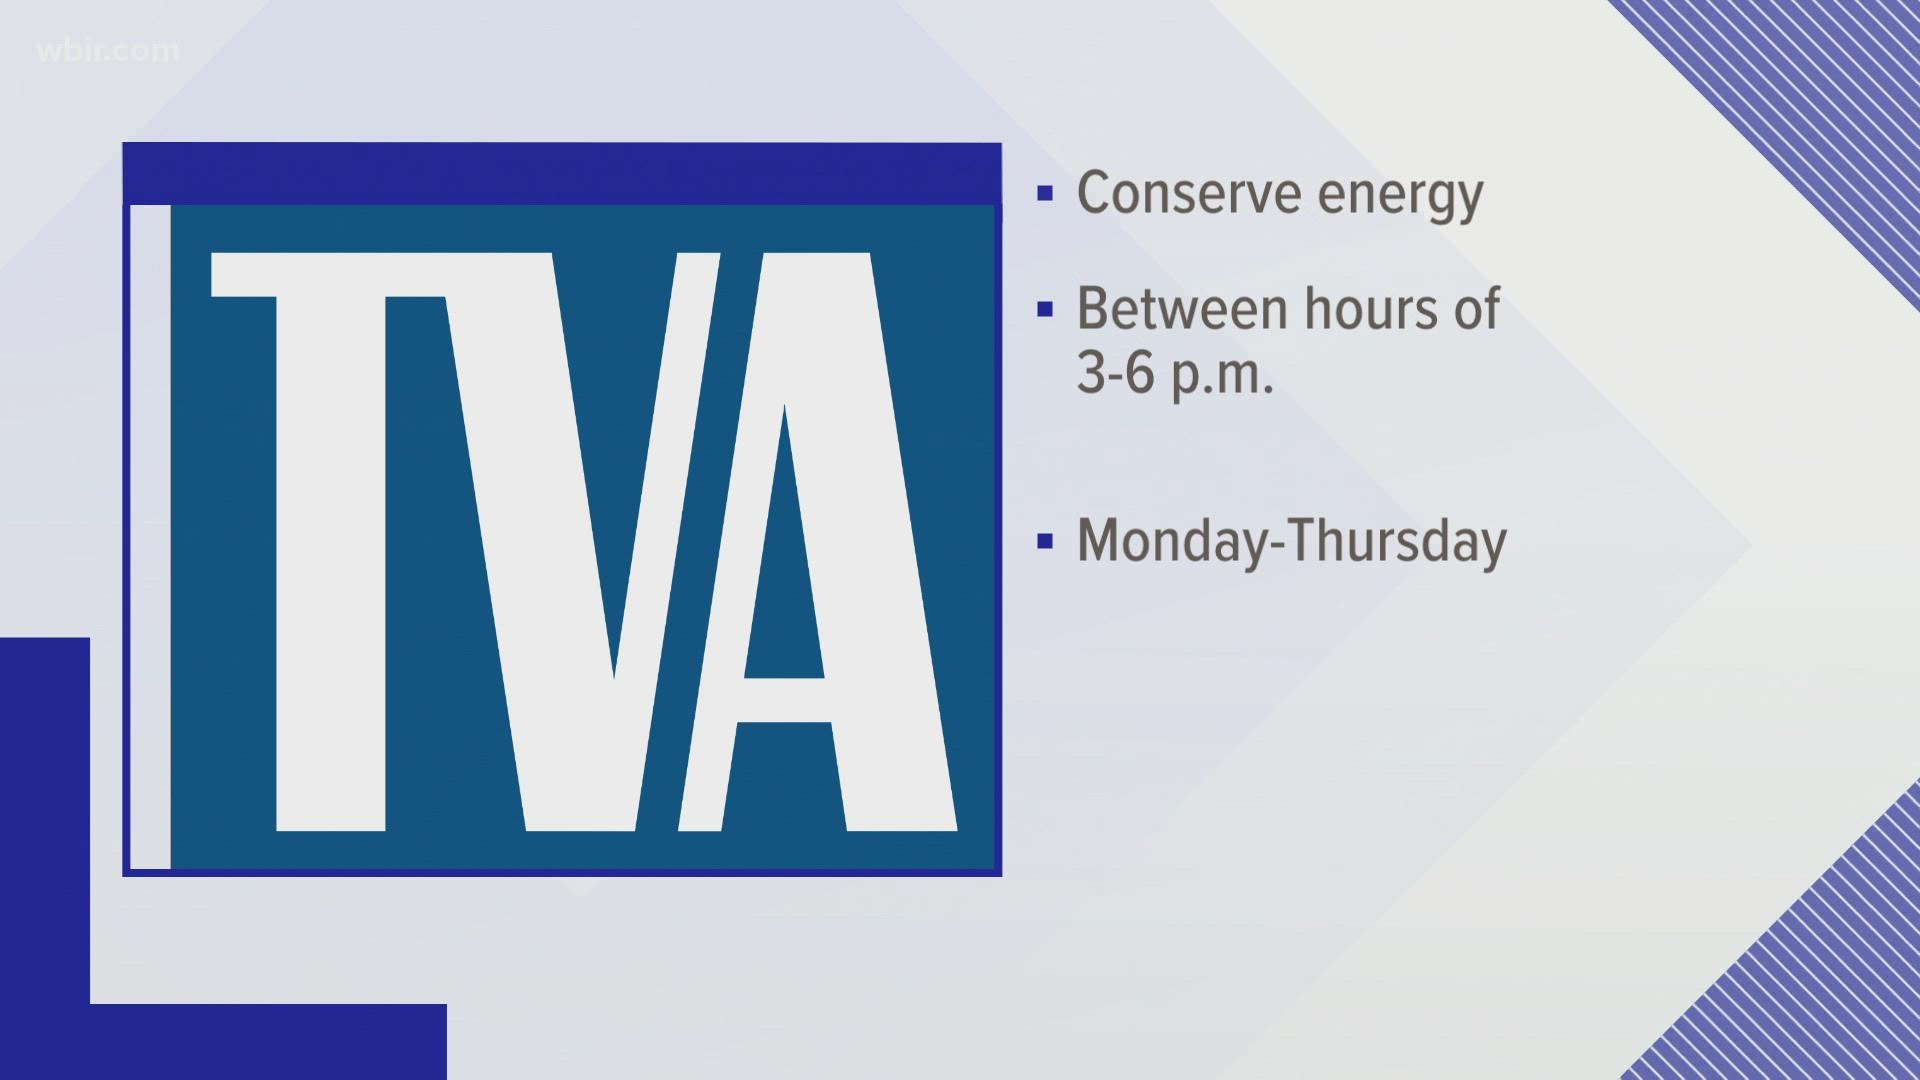 Officials said that they are seeing a period of all-time record electricity consumption across the TVA's region.